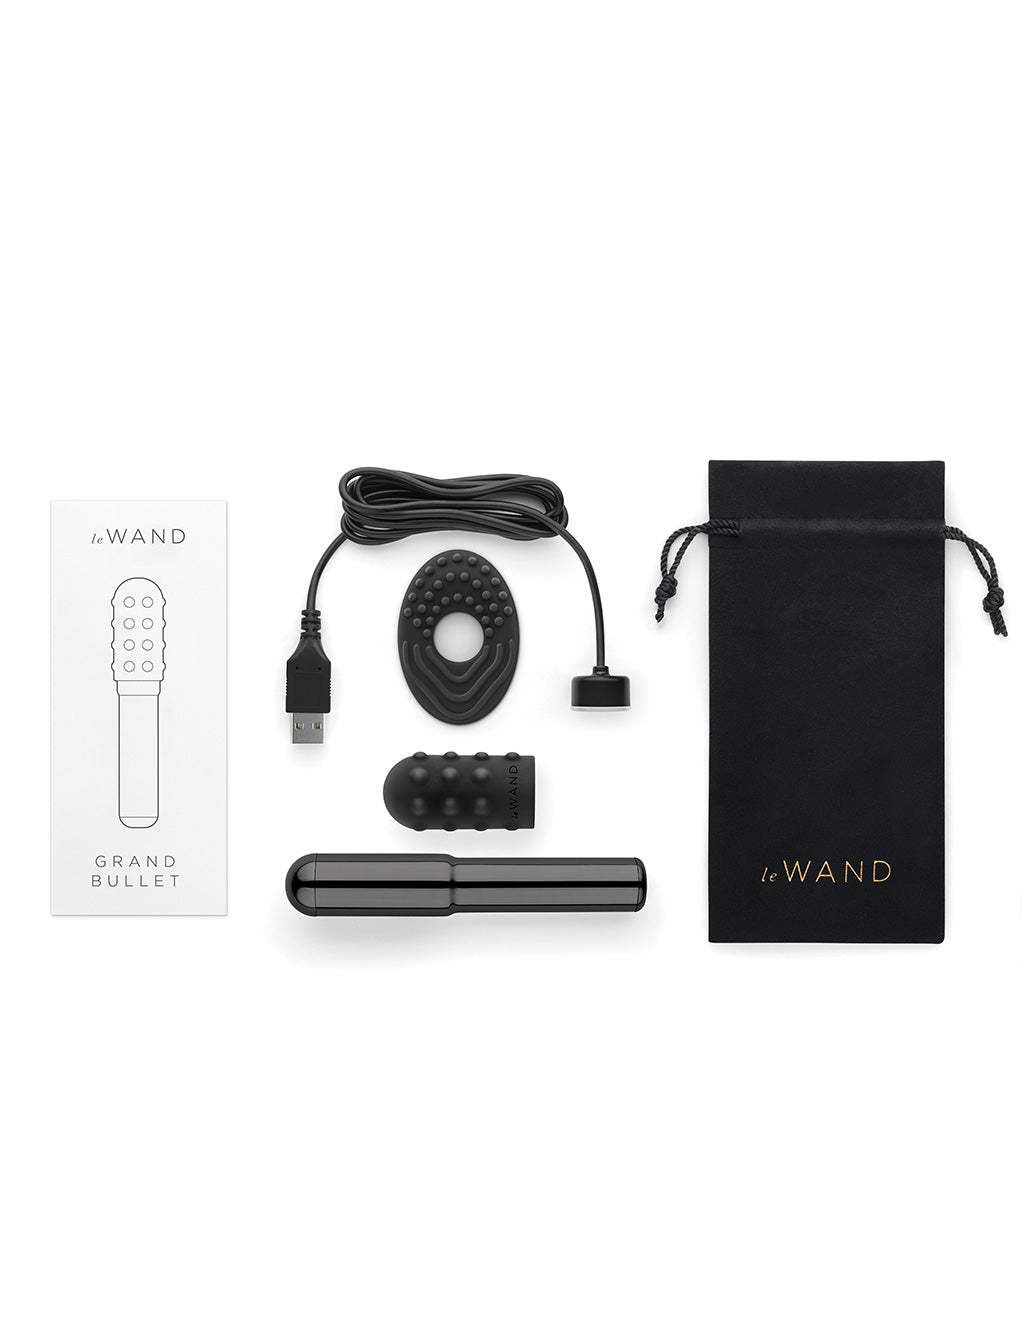 Le Wand Grand Bullet Rechargeable Clitoral Vibrator- Black- Contents